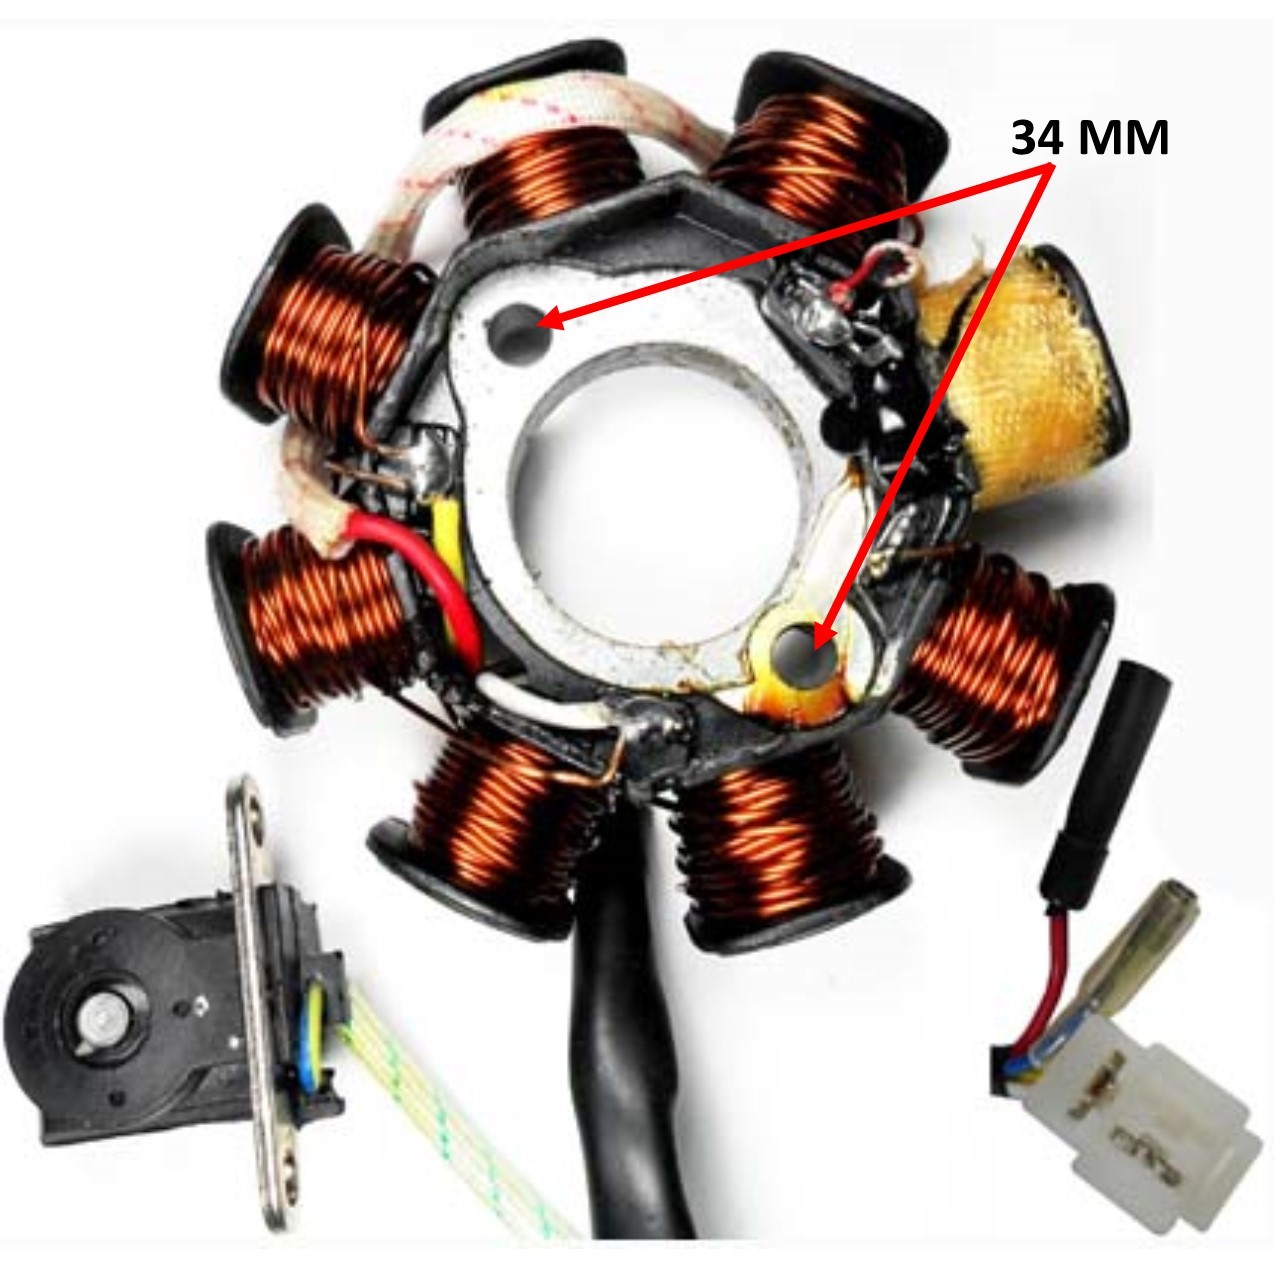 Stator 49-150cc 4 Stroke Fits Many Chinese ATV, GoKarts, Scooters 8 Coil 2 Pin in 3 Pin Jack + 2 Wires 1 Pole Wrapped Pickup Coil c/c=41 - Click Image to Close